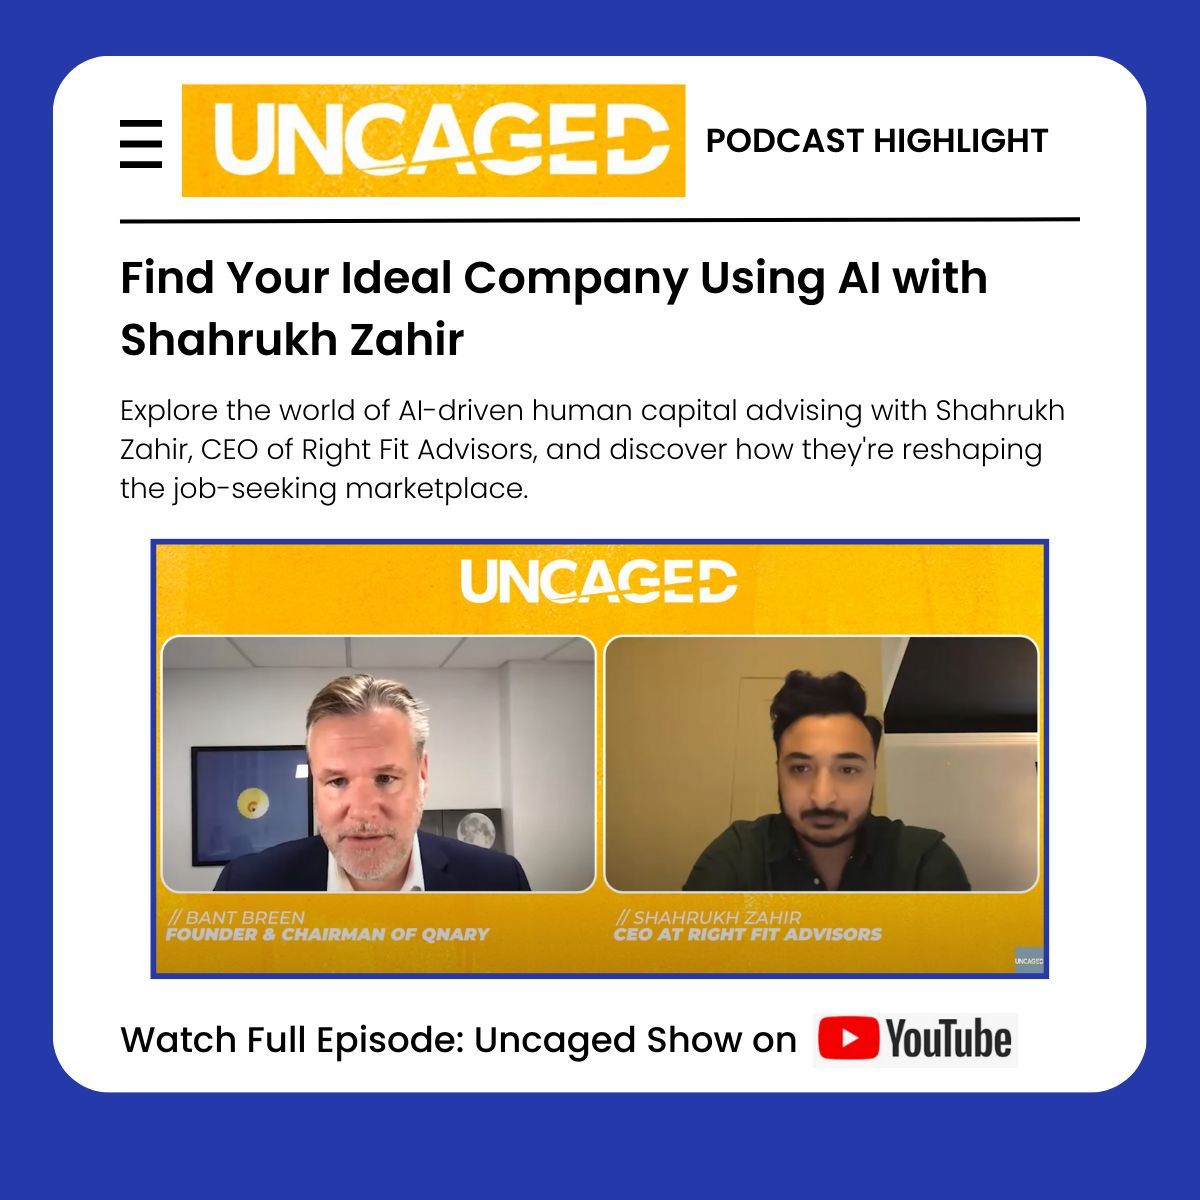 Tune in to The UNCAGED Show podcast for visionary insights from our CEO, Shahrukh Zahir, on AI-driven human capital. Dive into shaping the future of business with his expert thoughts! #CEOInsights #AIinBusiness #FutureLeadership #Podcast

Listen here>buff.ly/43a6UI1